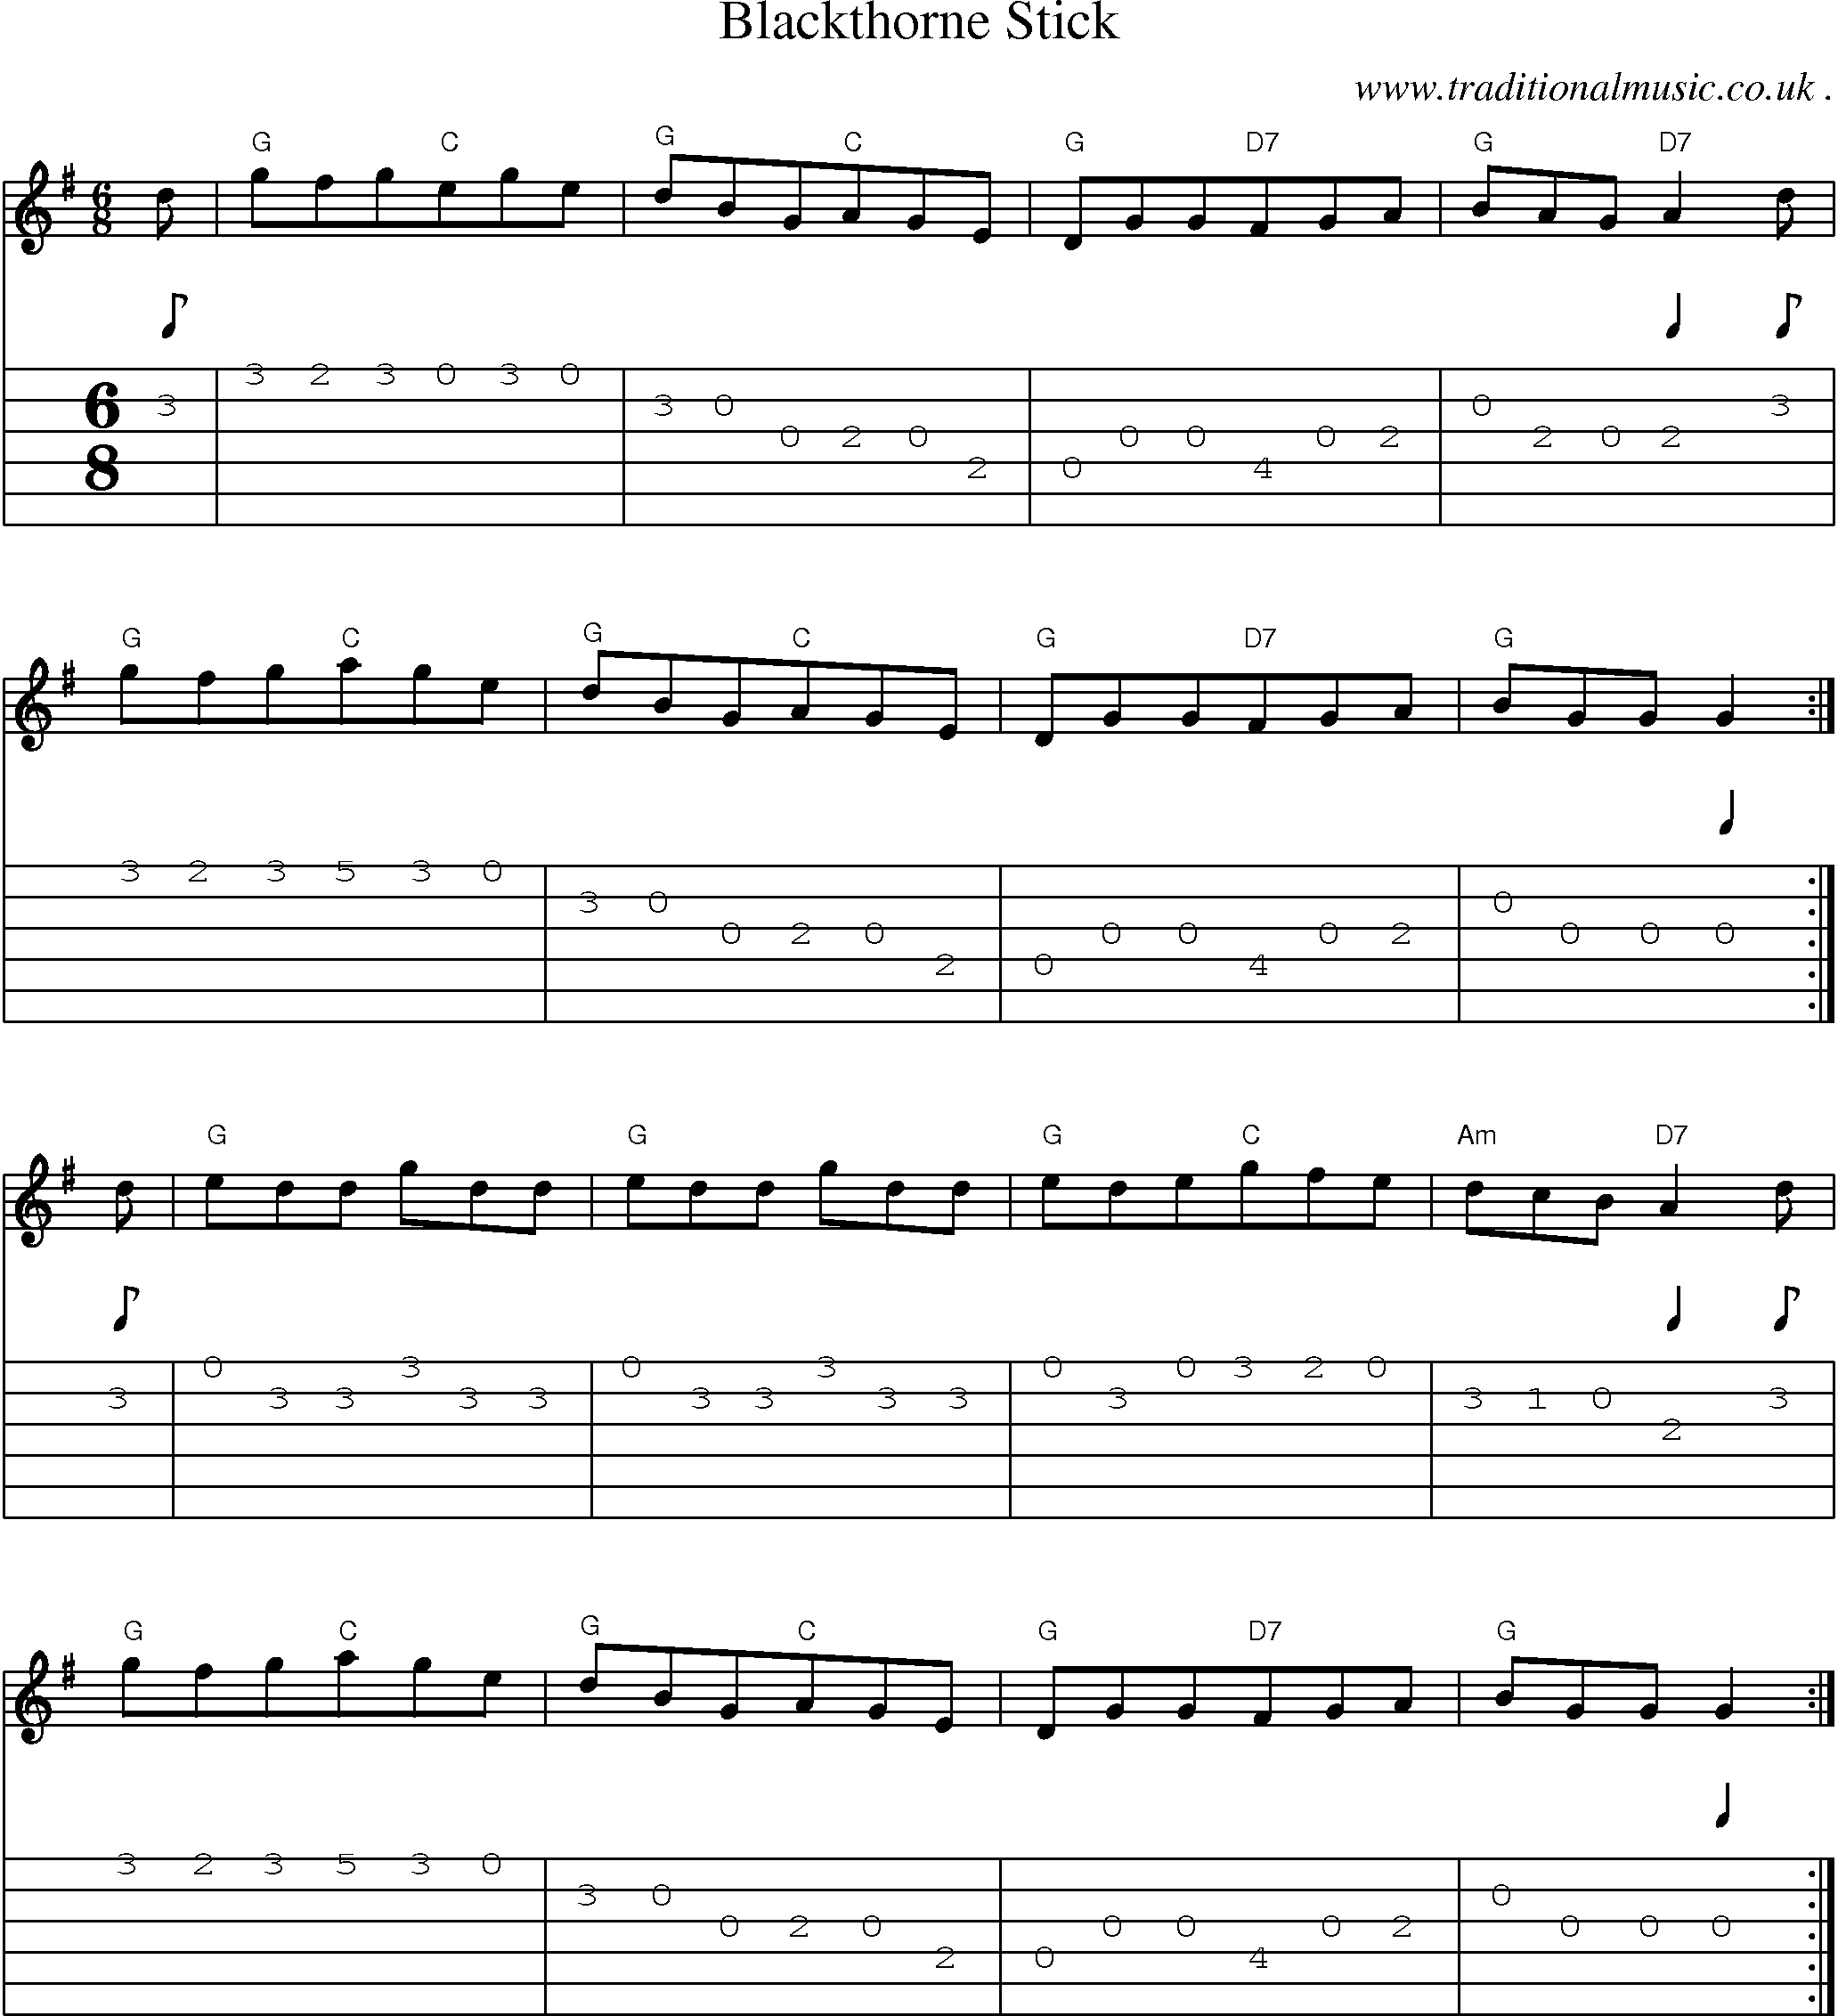 Sheet-Music and Guitar Tabs for Blackthorne Stick